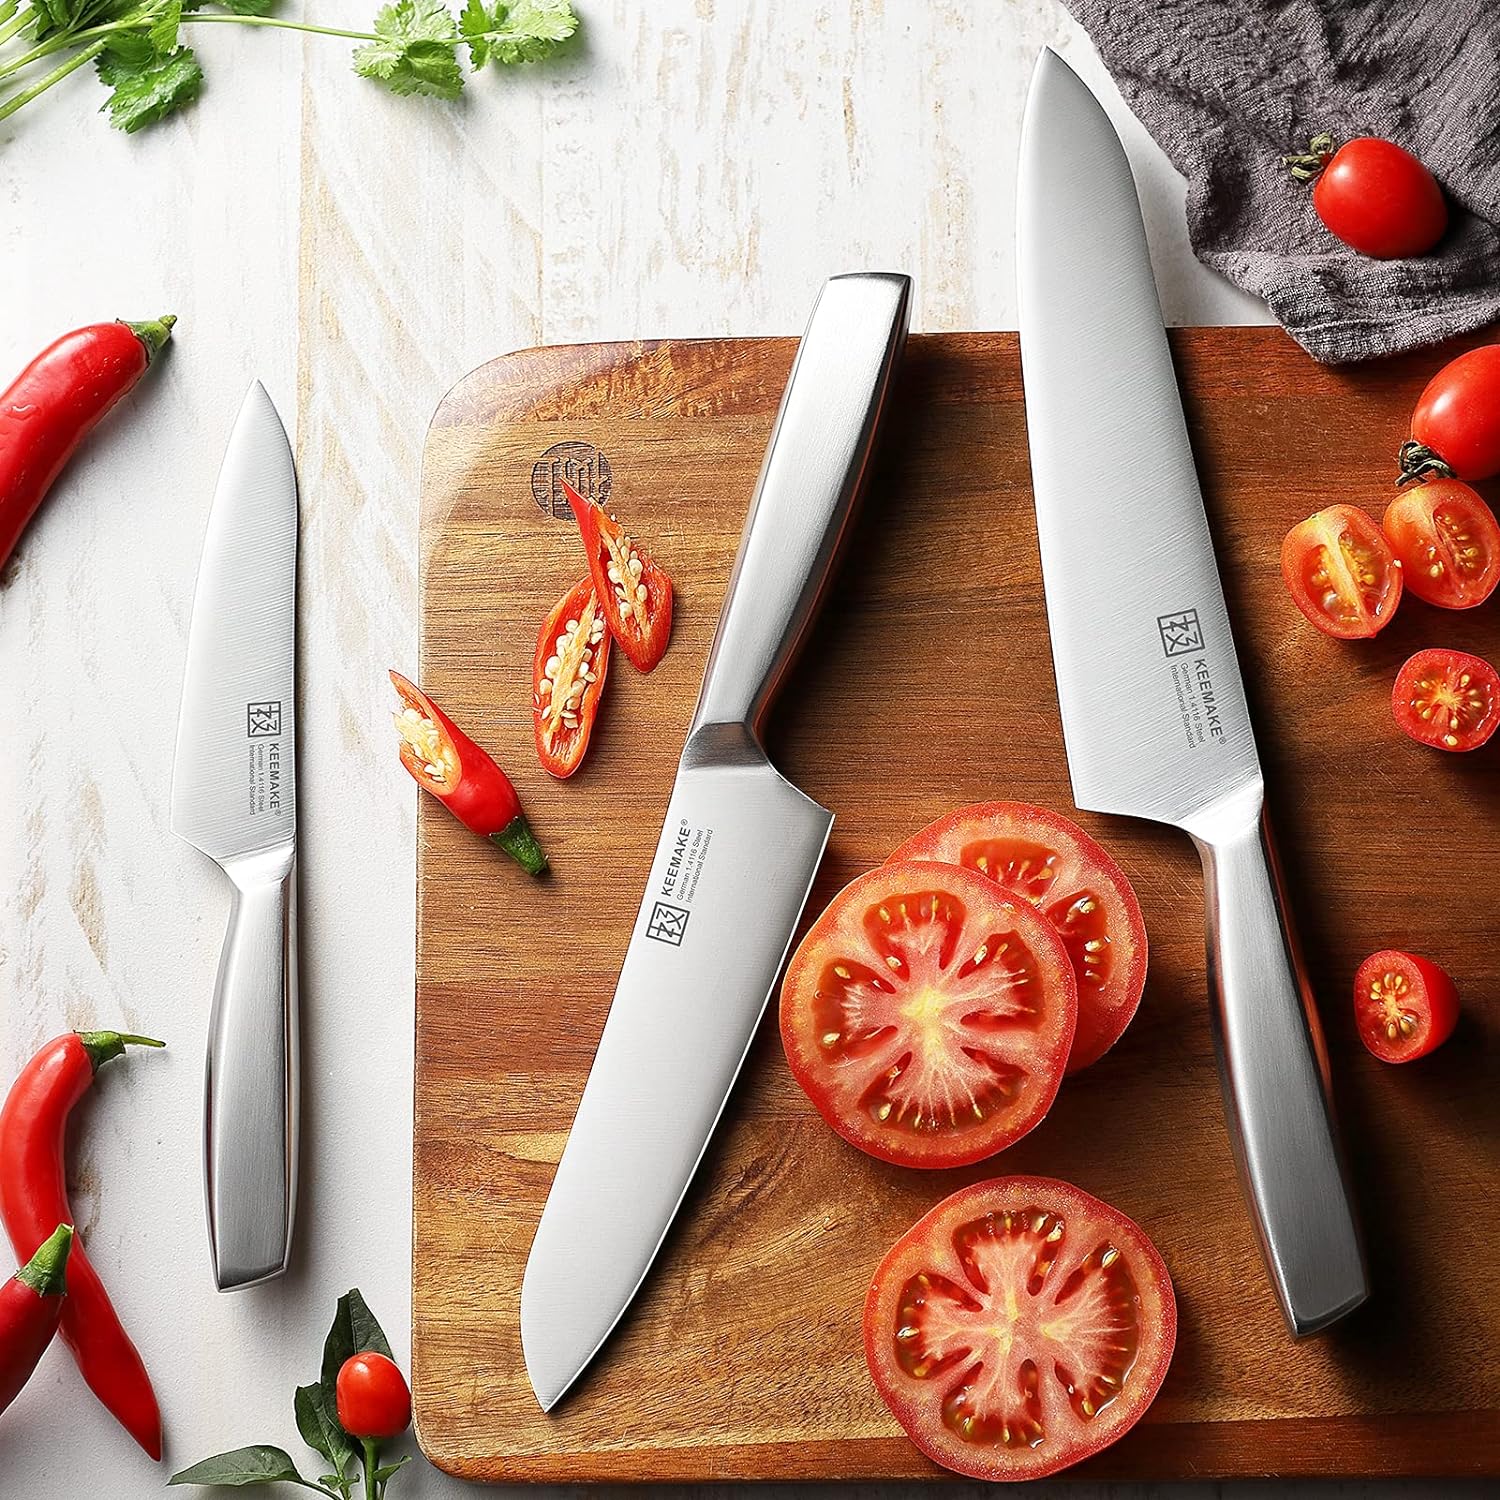 KEEMAKE 3pcs kitchen knife set high carbon stainless steel 1.4116 for meat & vegetable cutting